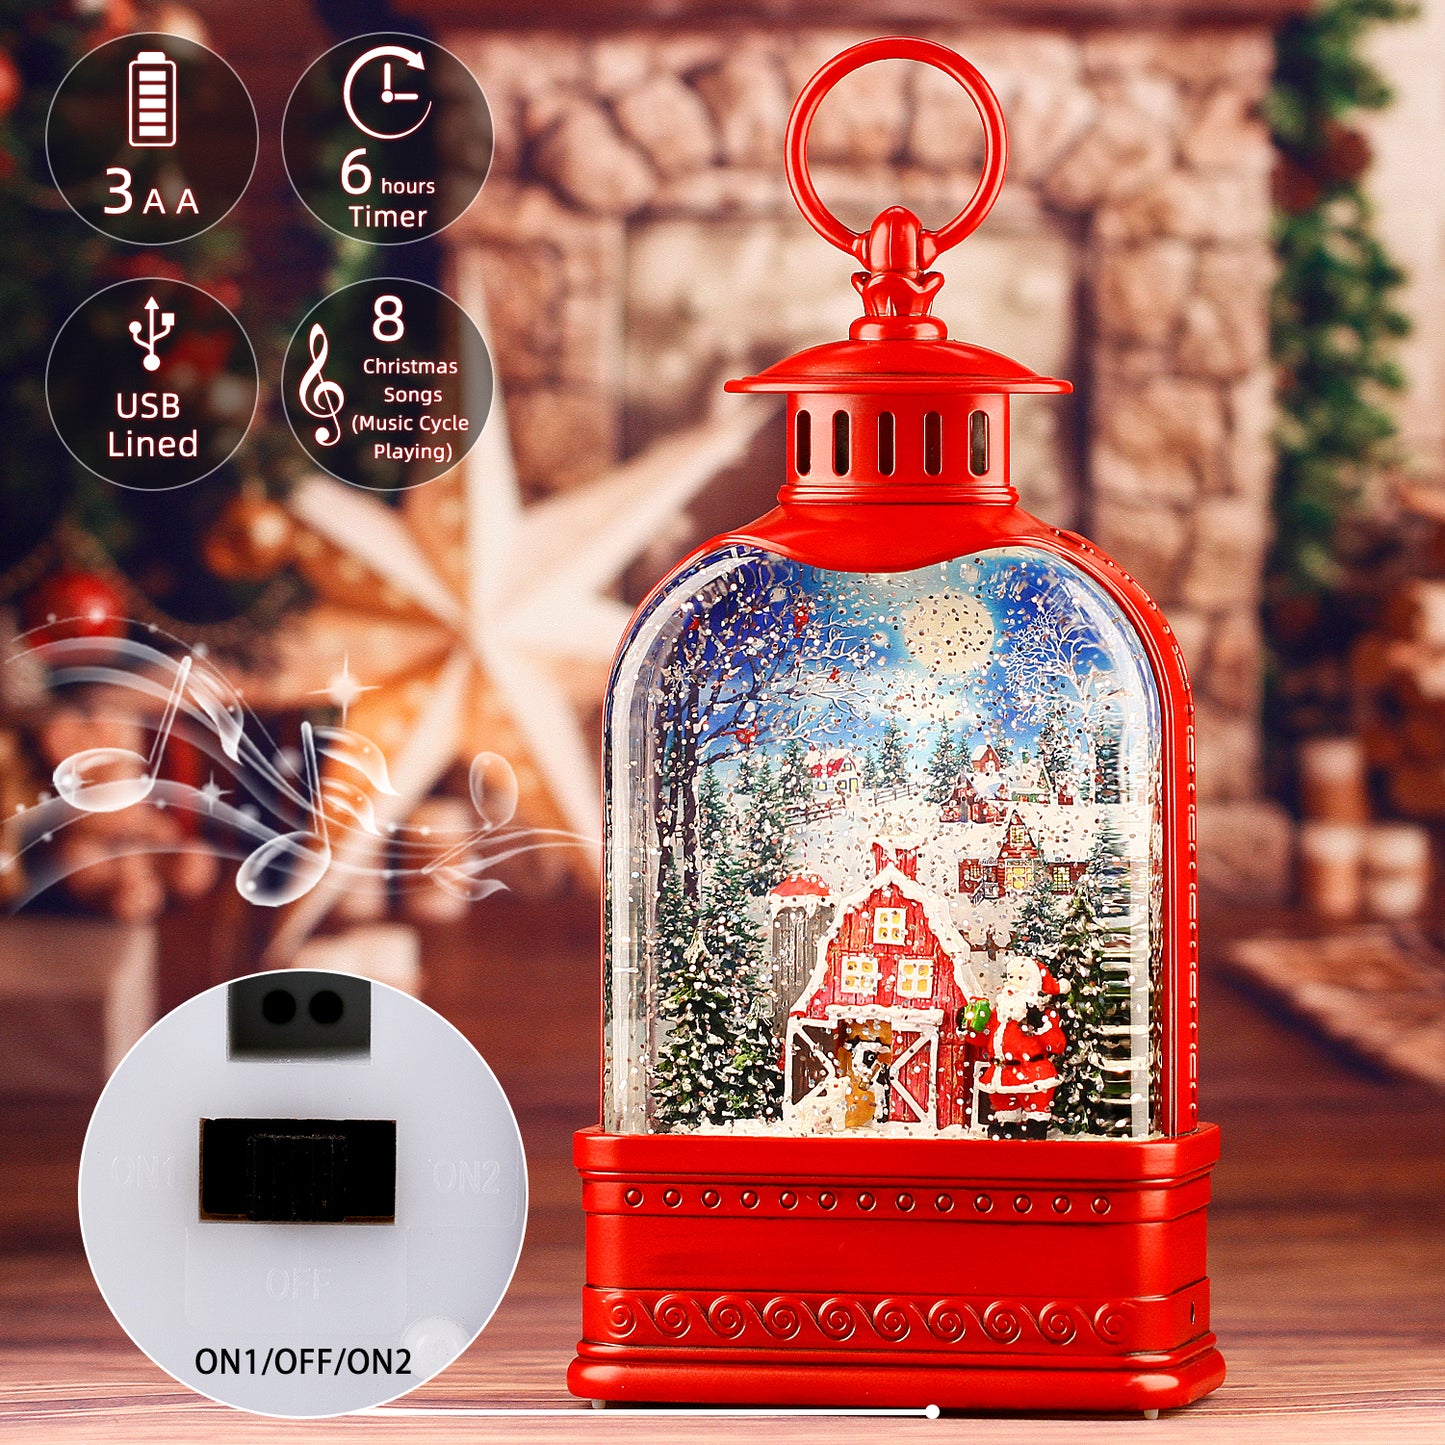 Christmas Decorations,Snow Globe Merry Christmas Gifts with Musical,Water Glittering Lantern Swirling ,Christmas Home Decorations, Christmas Tree and Snowman